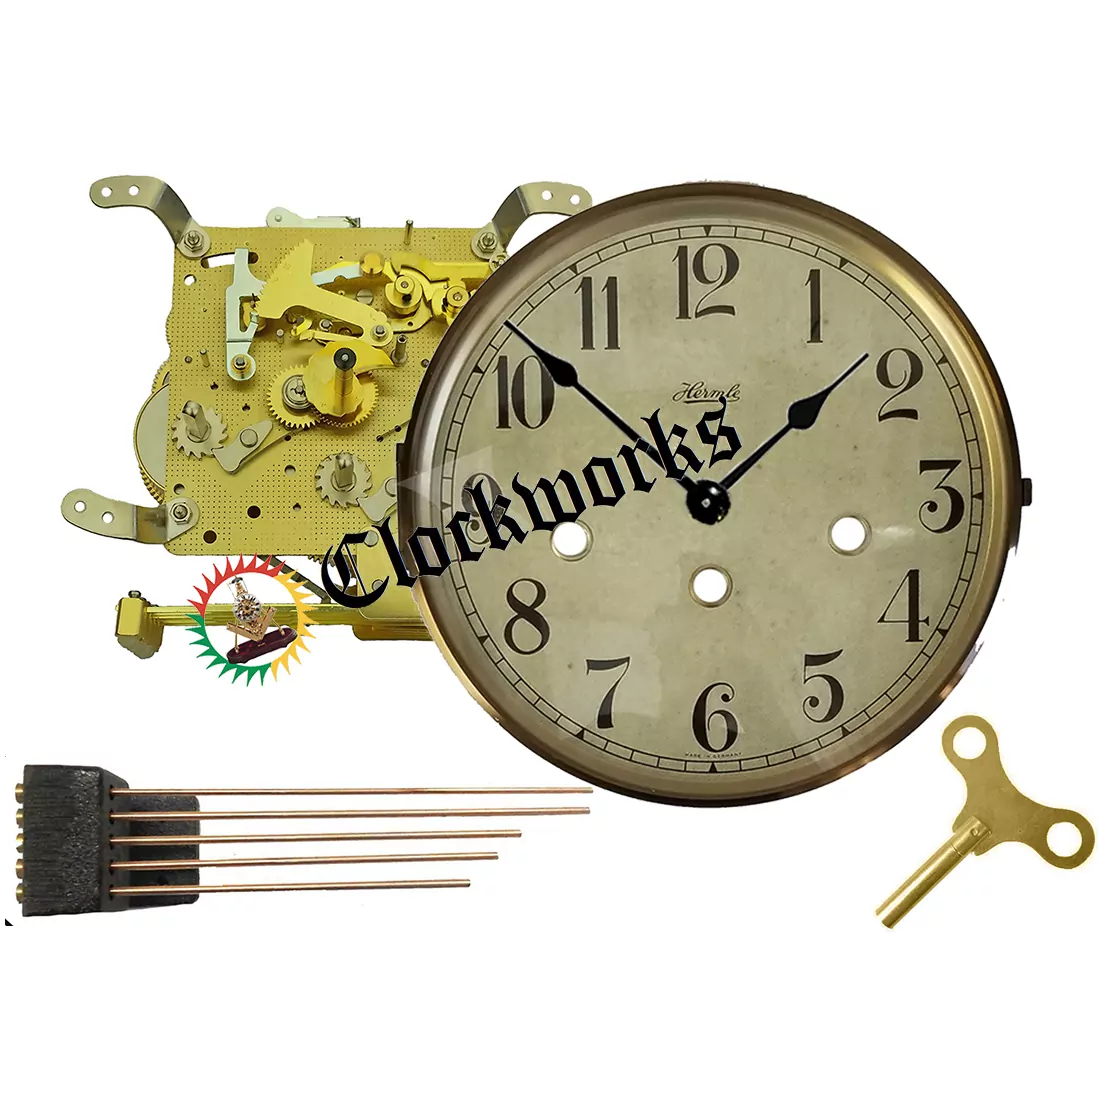 Hermle Clock Hand Nut Black 3 PIECES NEW Mechanical Mantel Wall Movement 1/4" 